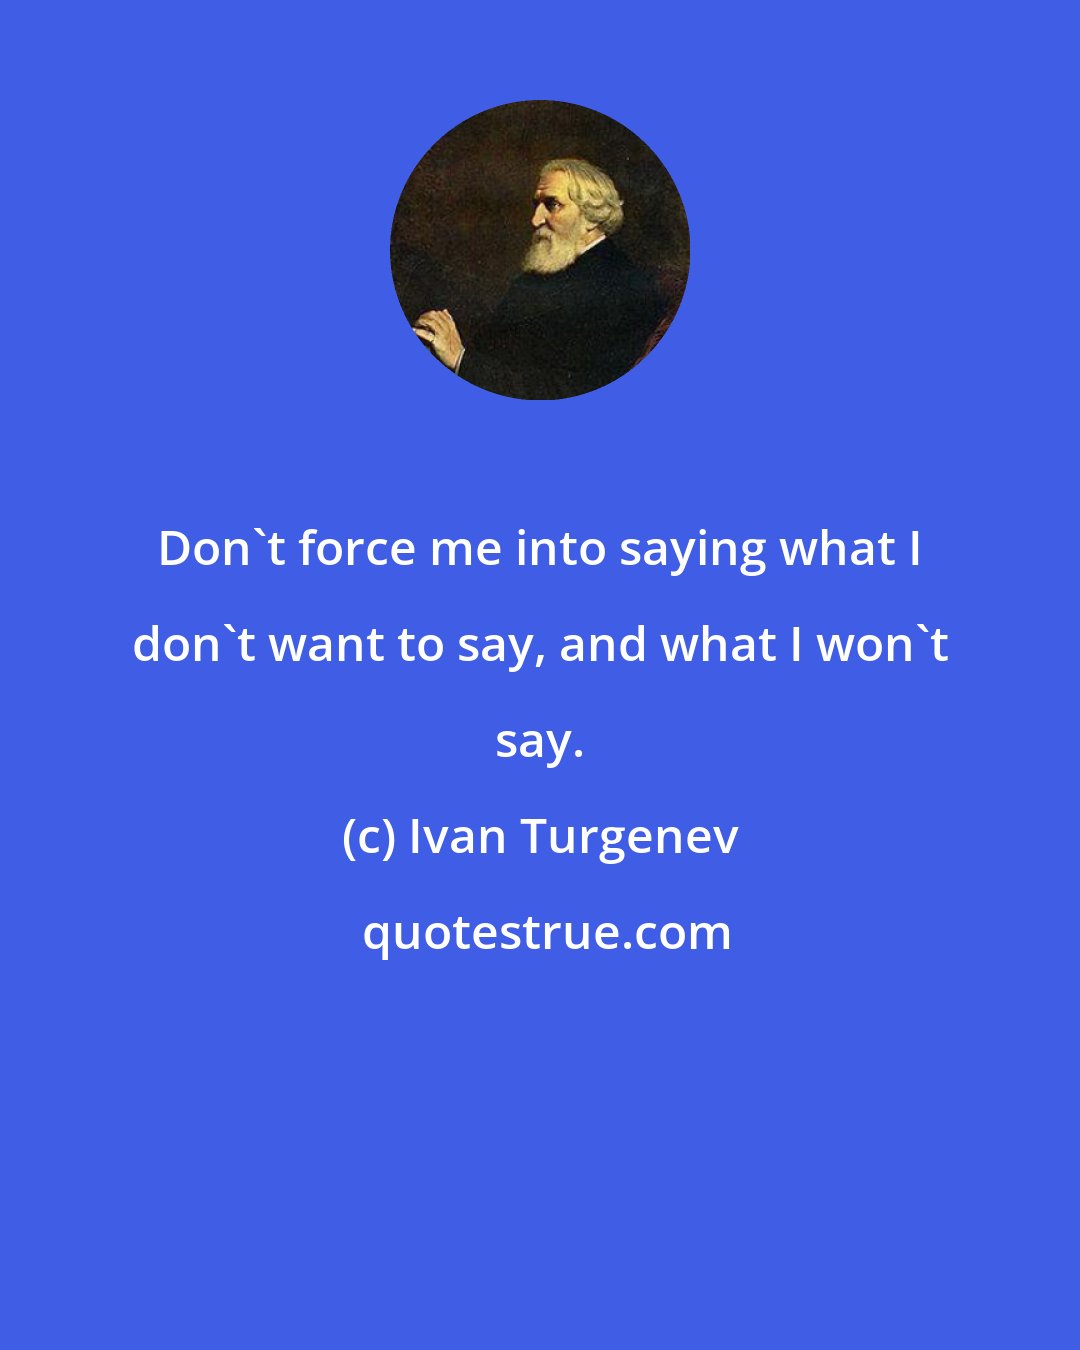 Ivan Turgenev: Don't force me into saying what I don't want to say, and what I won't say.